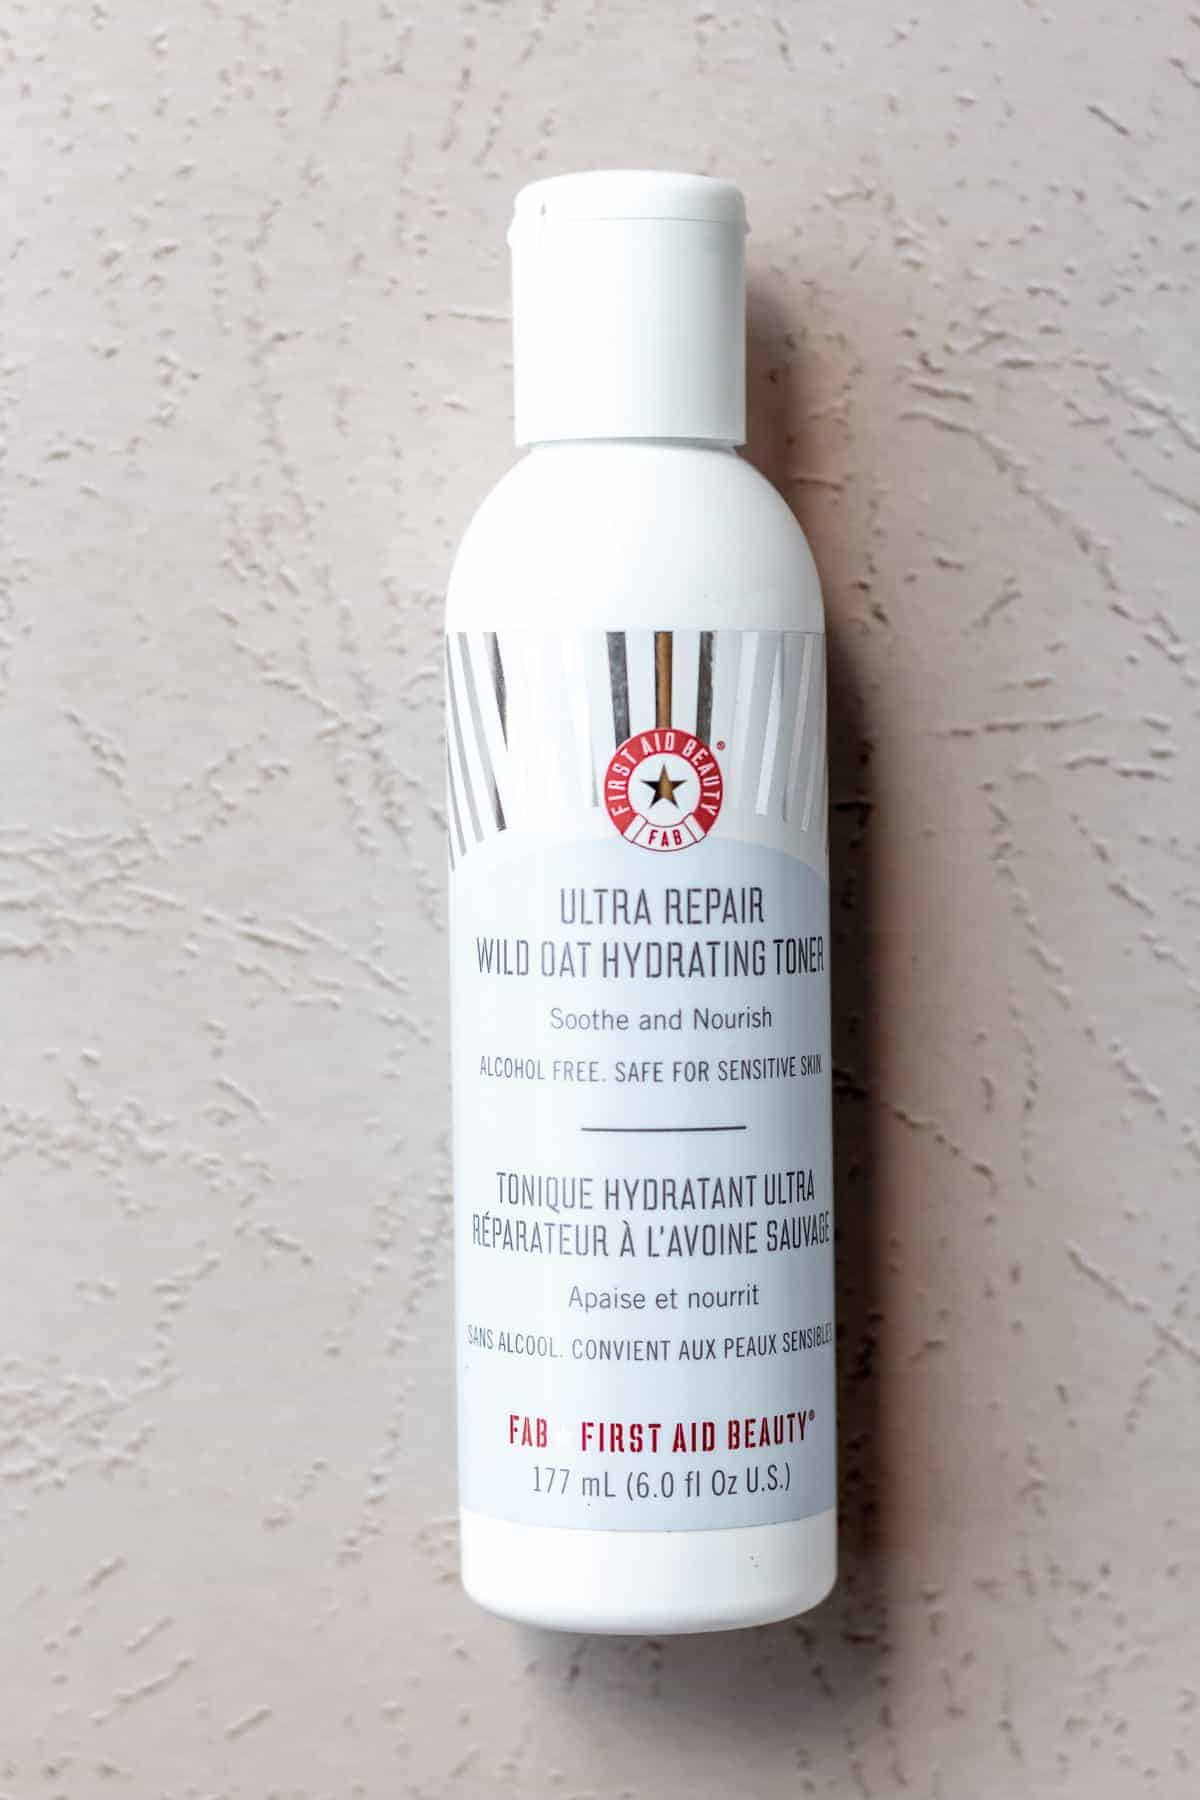 First Aid Beauty Ultra Repair Wild Oat Hydrating Toner on a light background